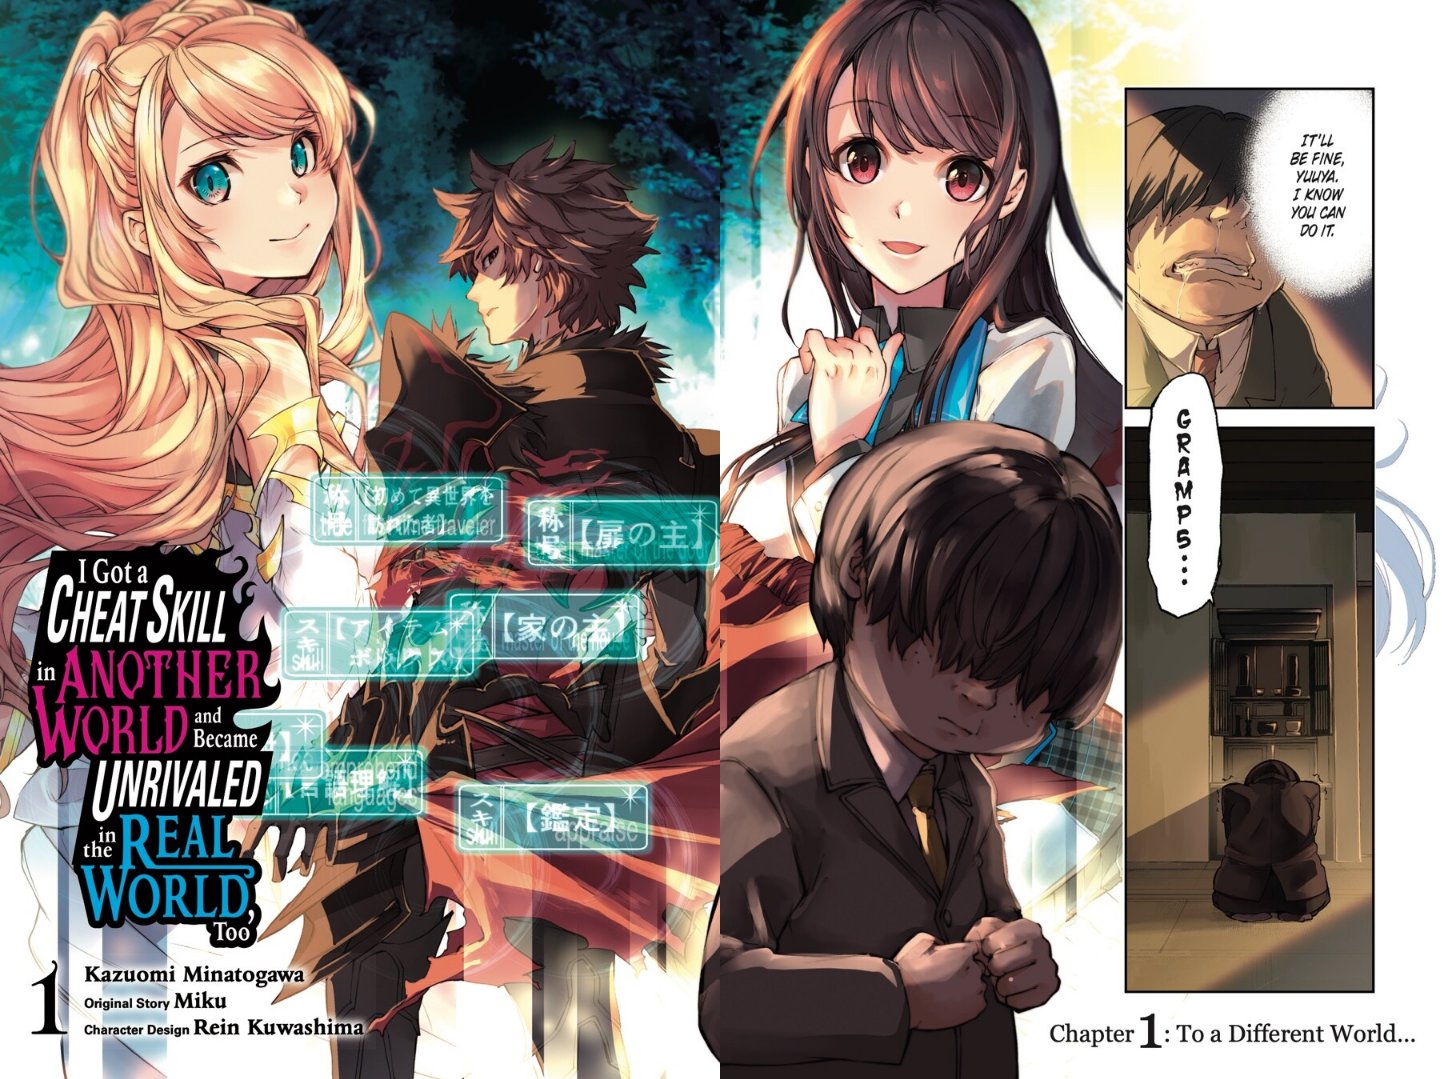  I Got a Cheat Skill in Another World and Became Unrivaled in  the Real World, Too Vol. 3 eBook : , Miku, Minatogawa, Kazuomi, Kuwashima,  Rein: Kindle Store